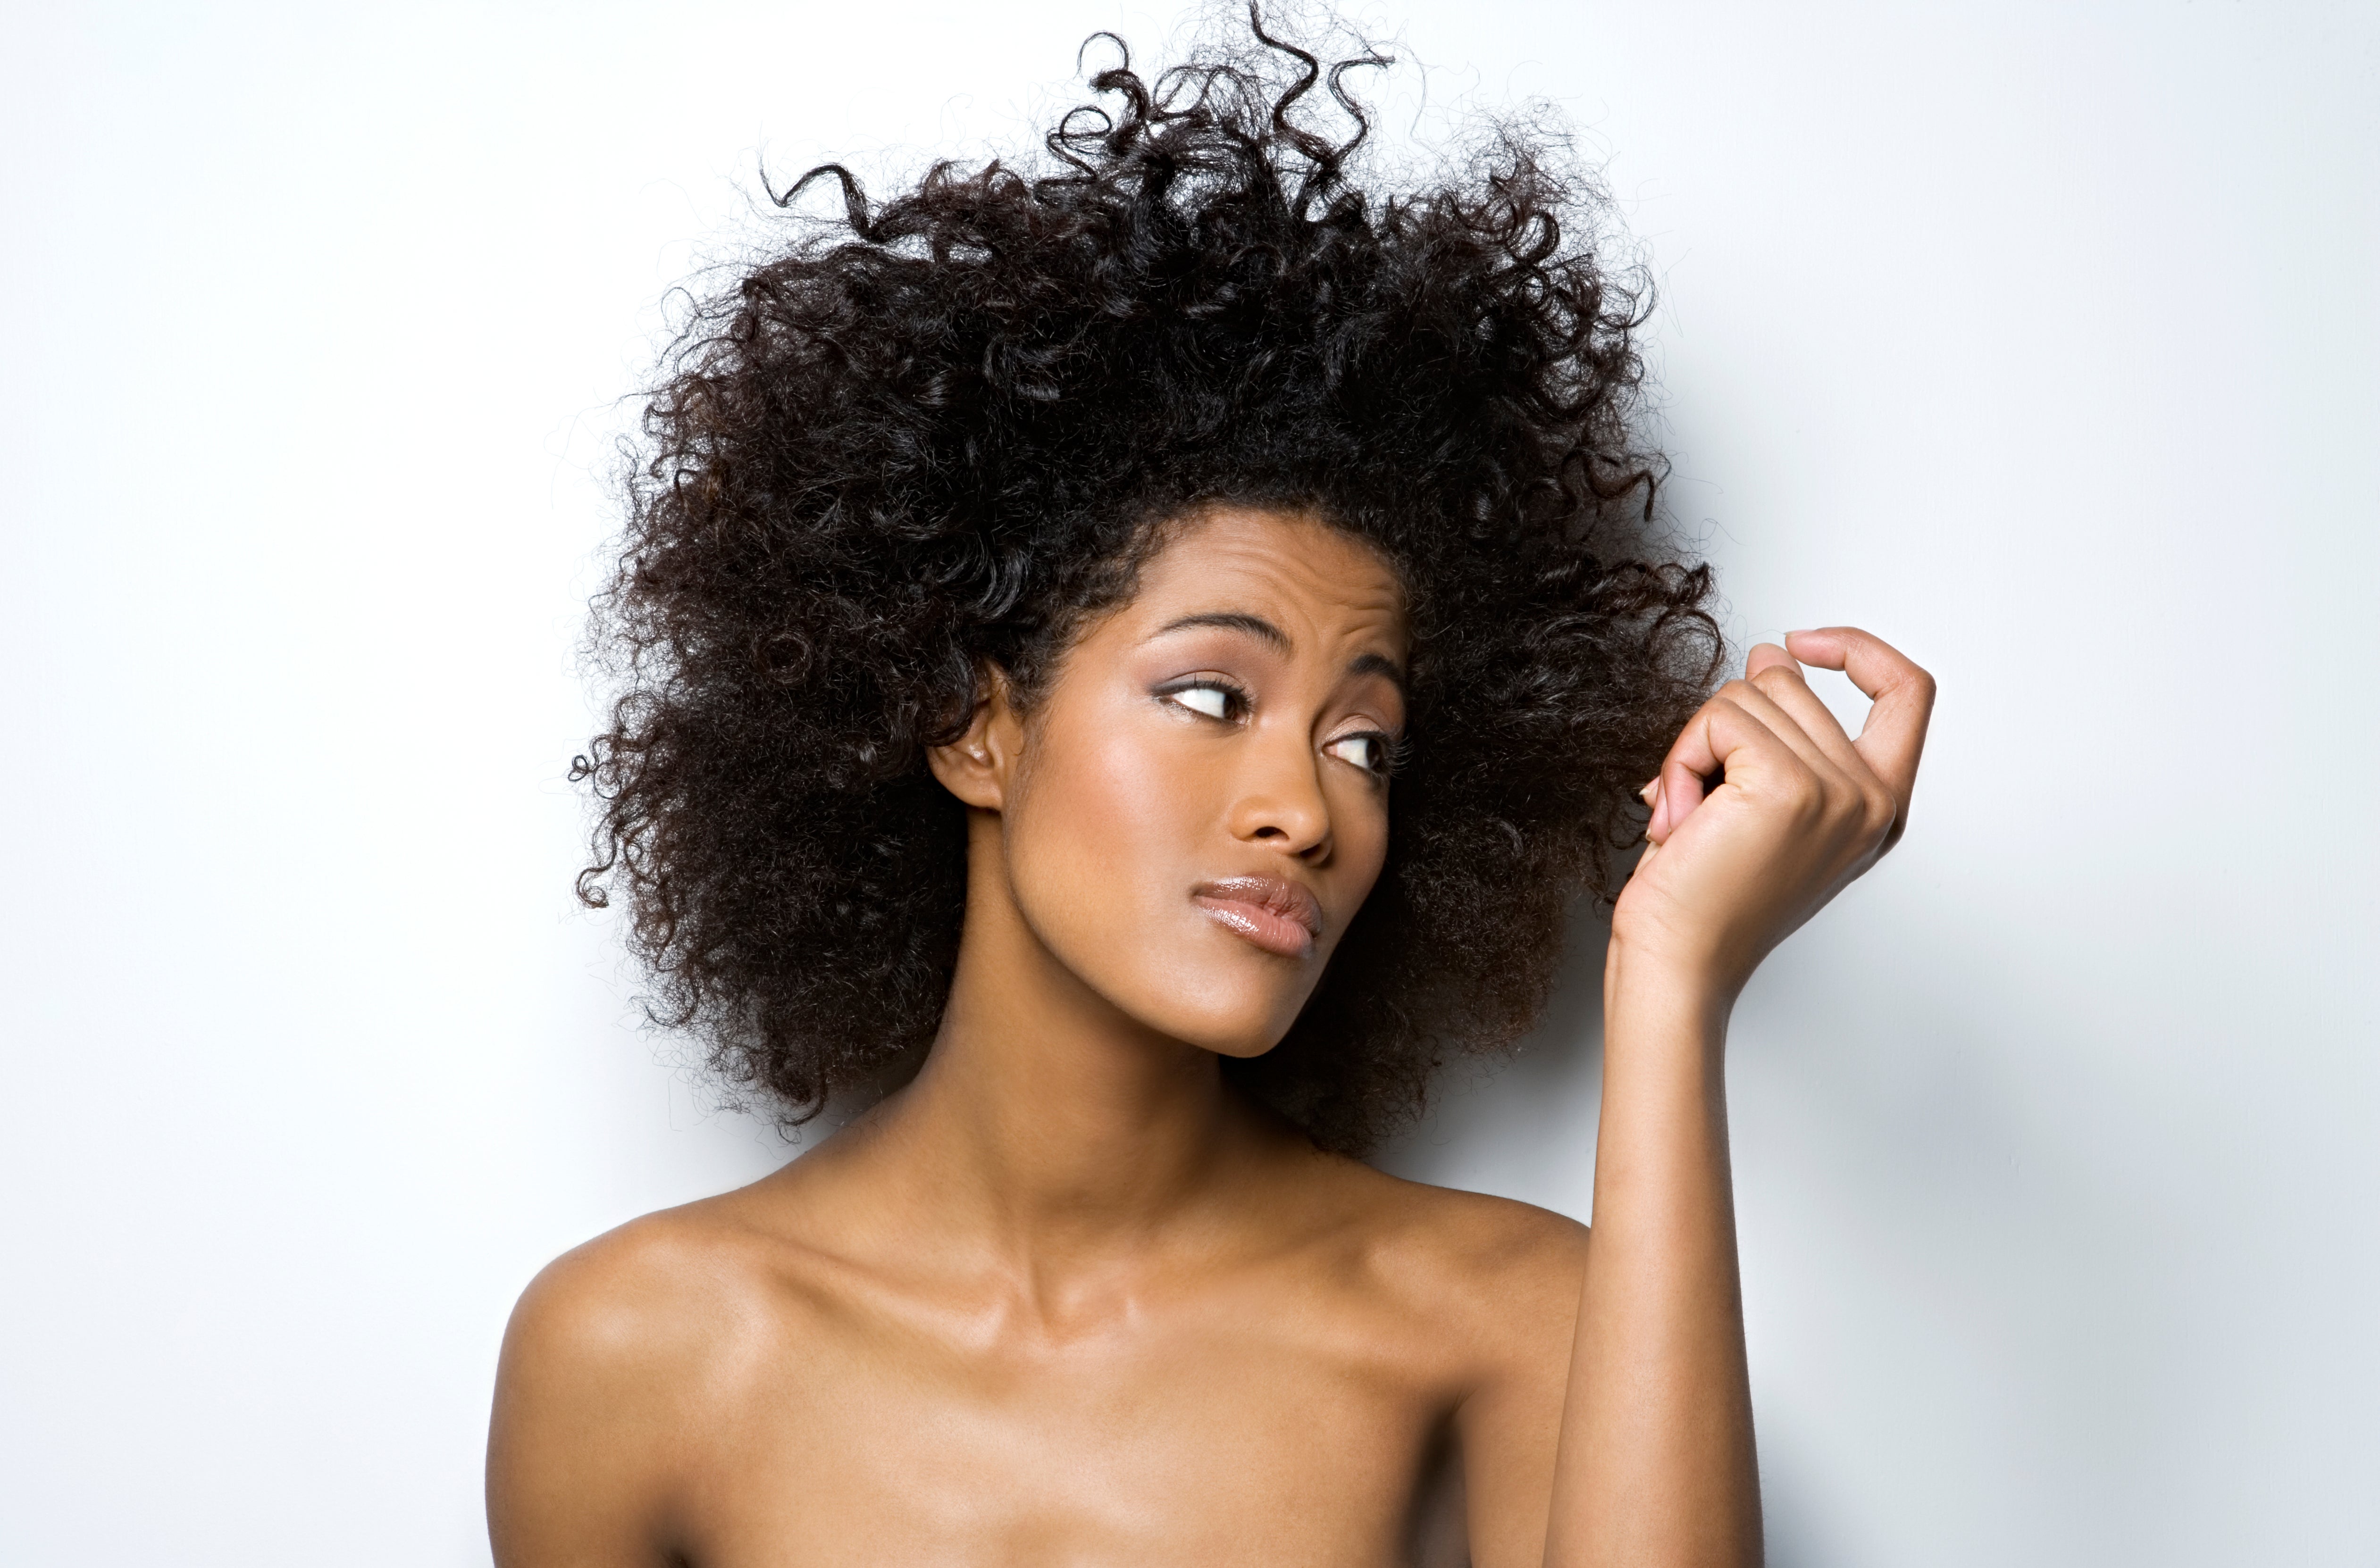 Here’s What Happened When I Let an Old White Man Style My Natural Hair